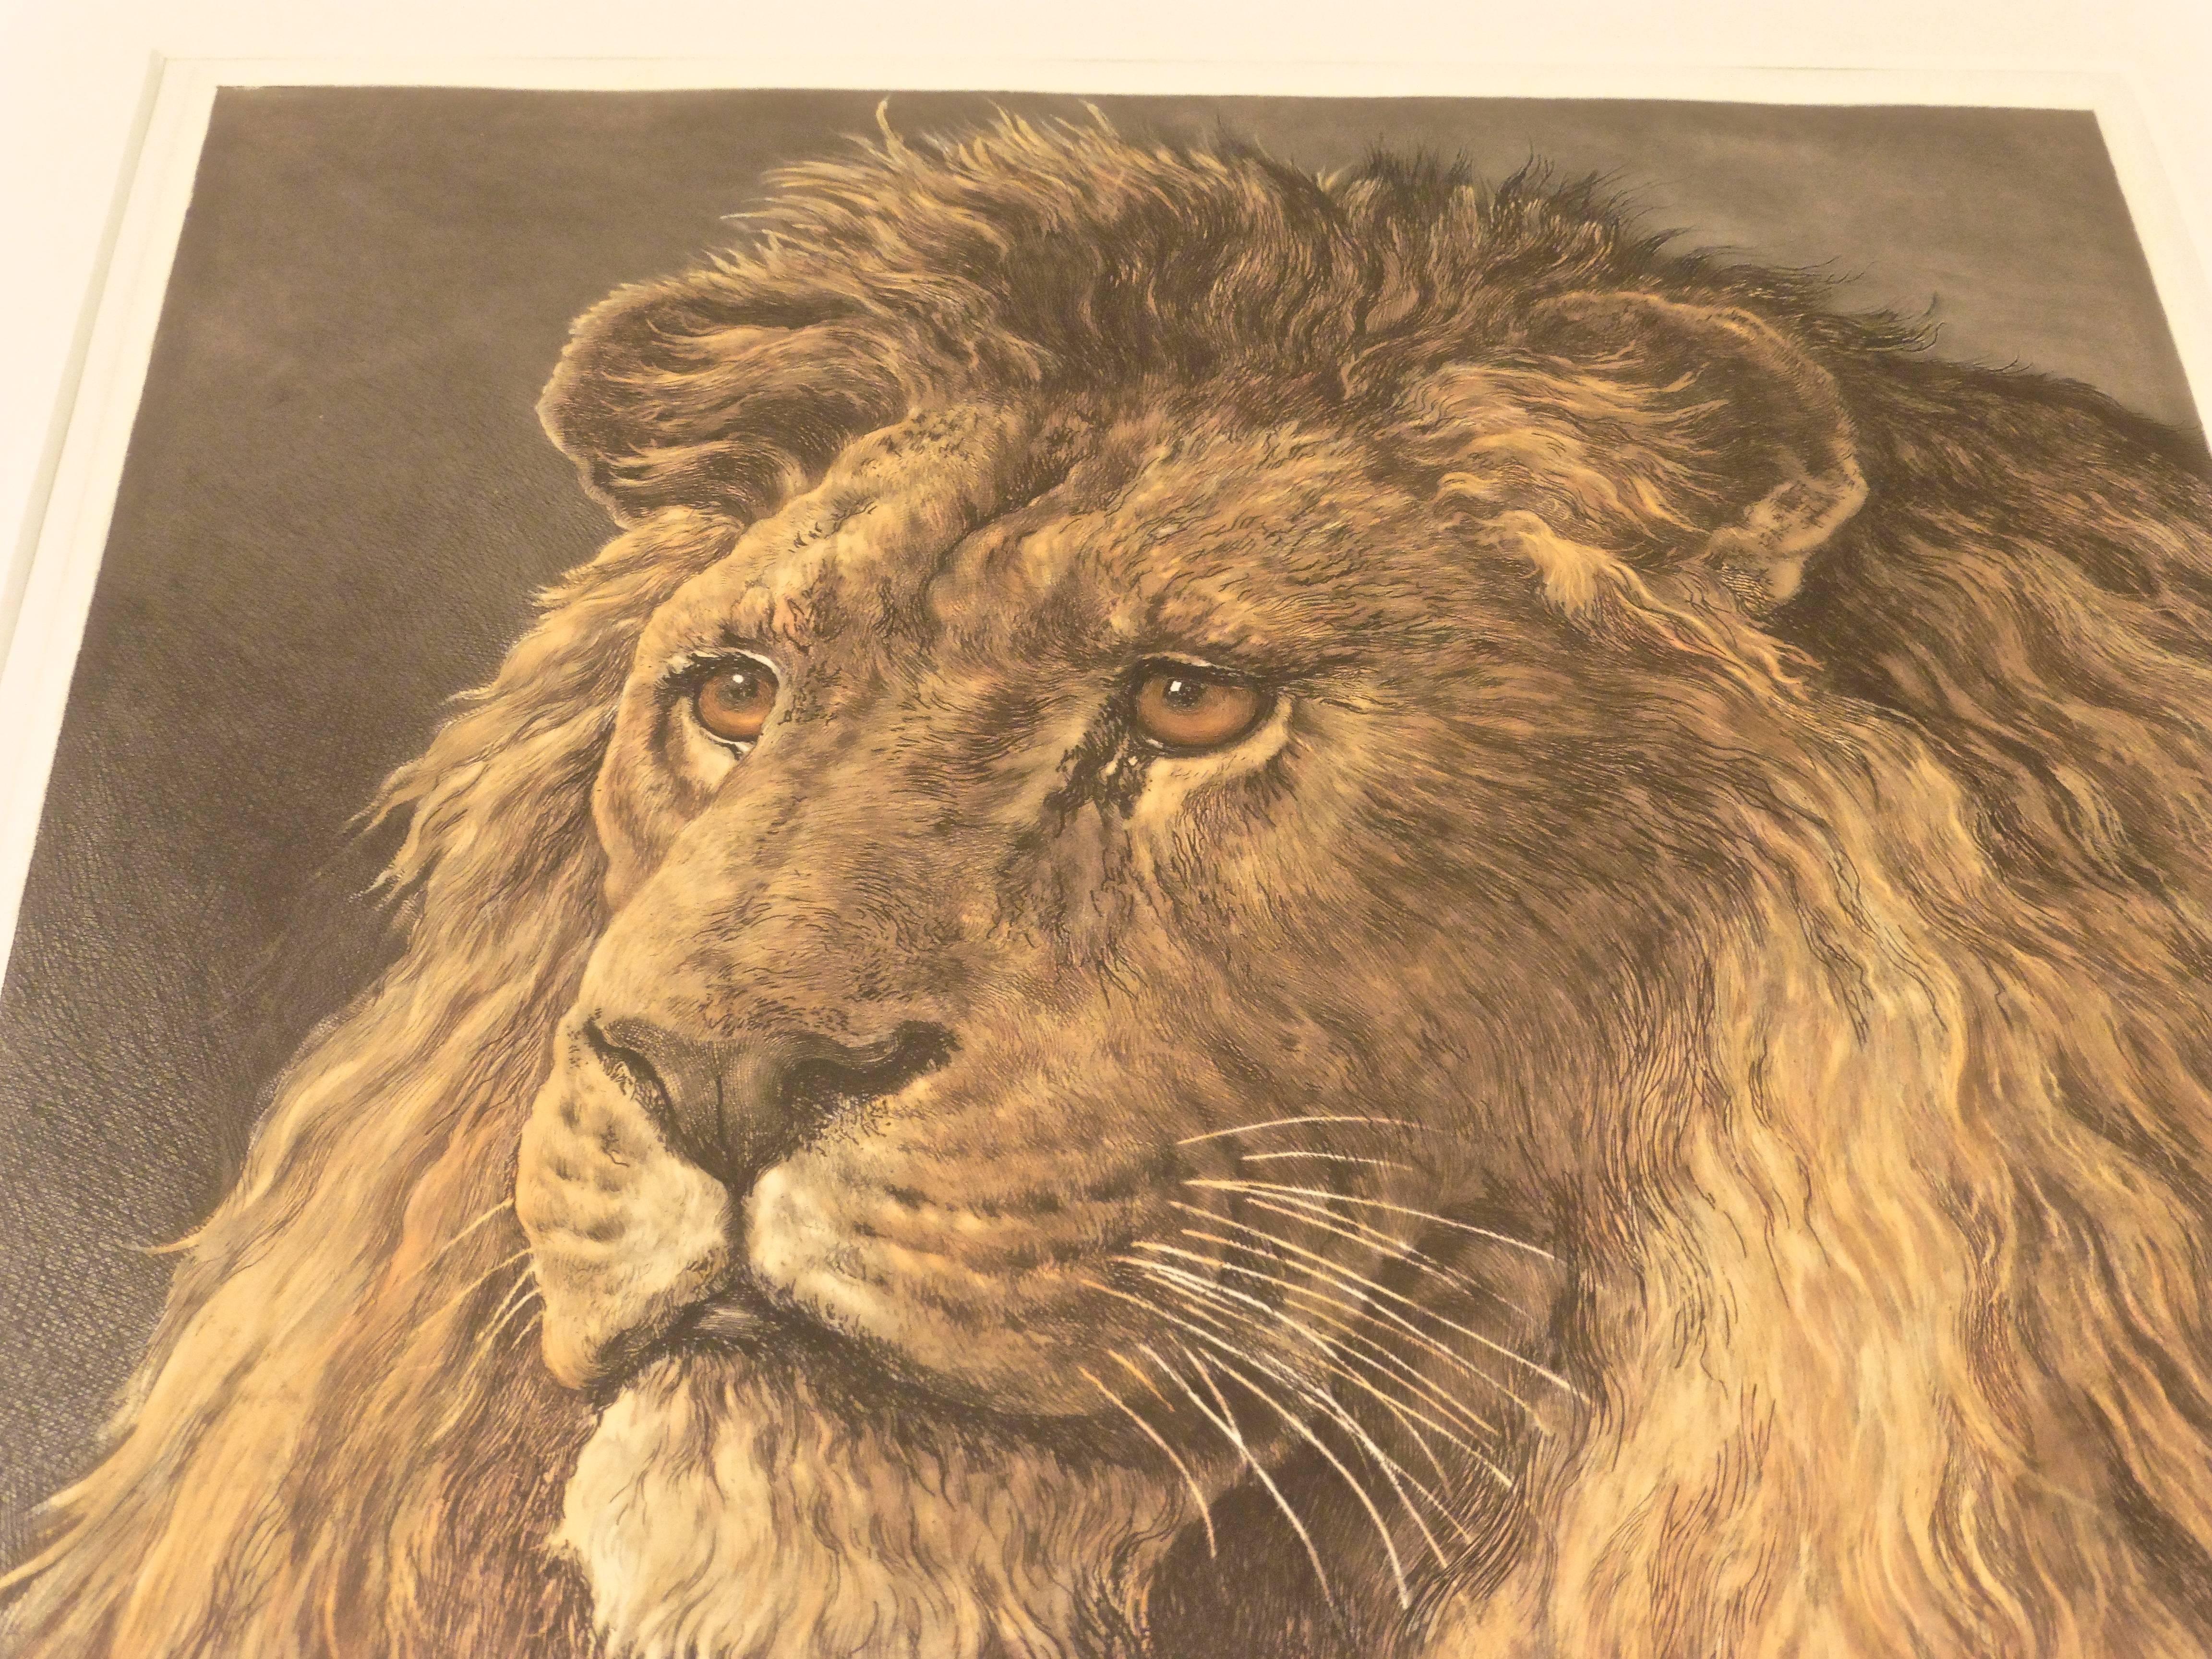 Hand-colored original engravings of a Lion and Tiger by the artist Herbert Dicksee (1862-1942). The regal lion with a fantastically detailed mane, solemnly gazing off into the distance, whilst the tiger glares at the viewer, mid-snarl, circa 1930,